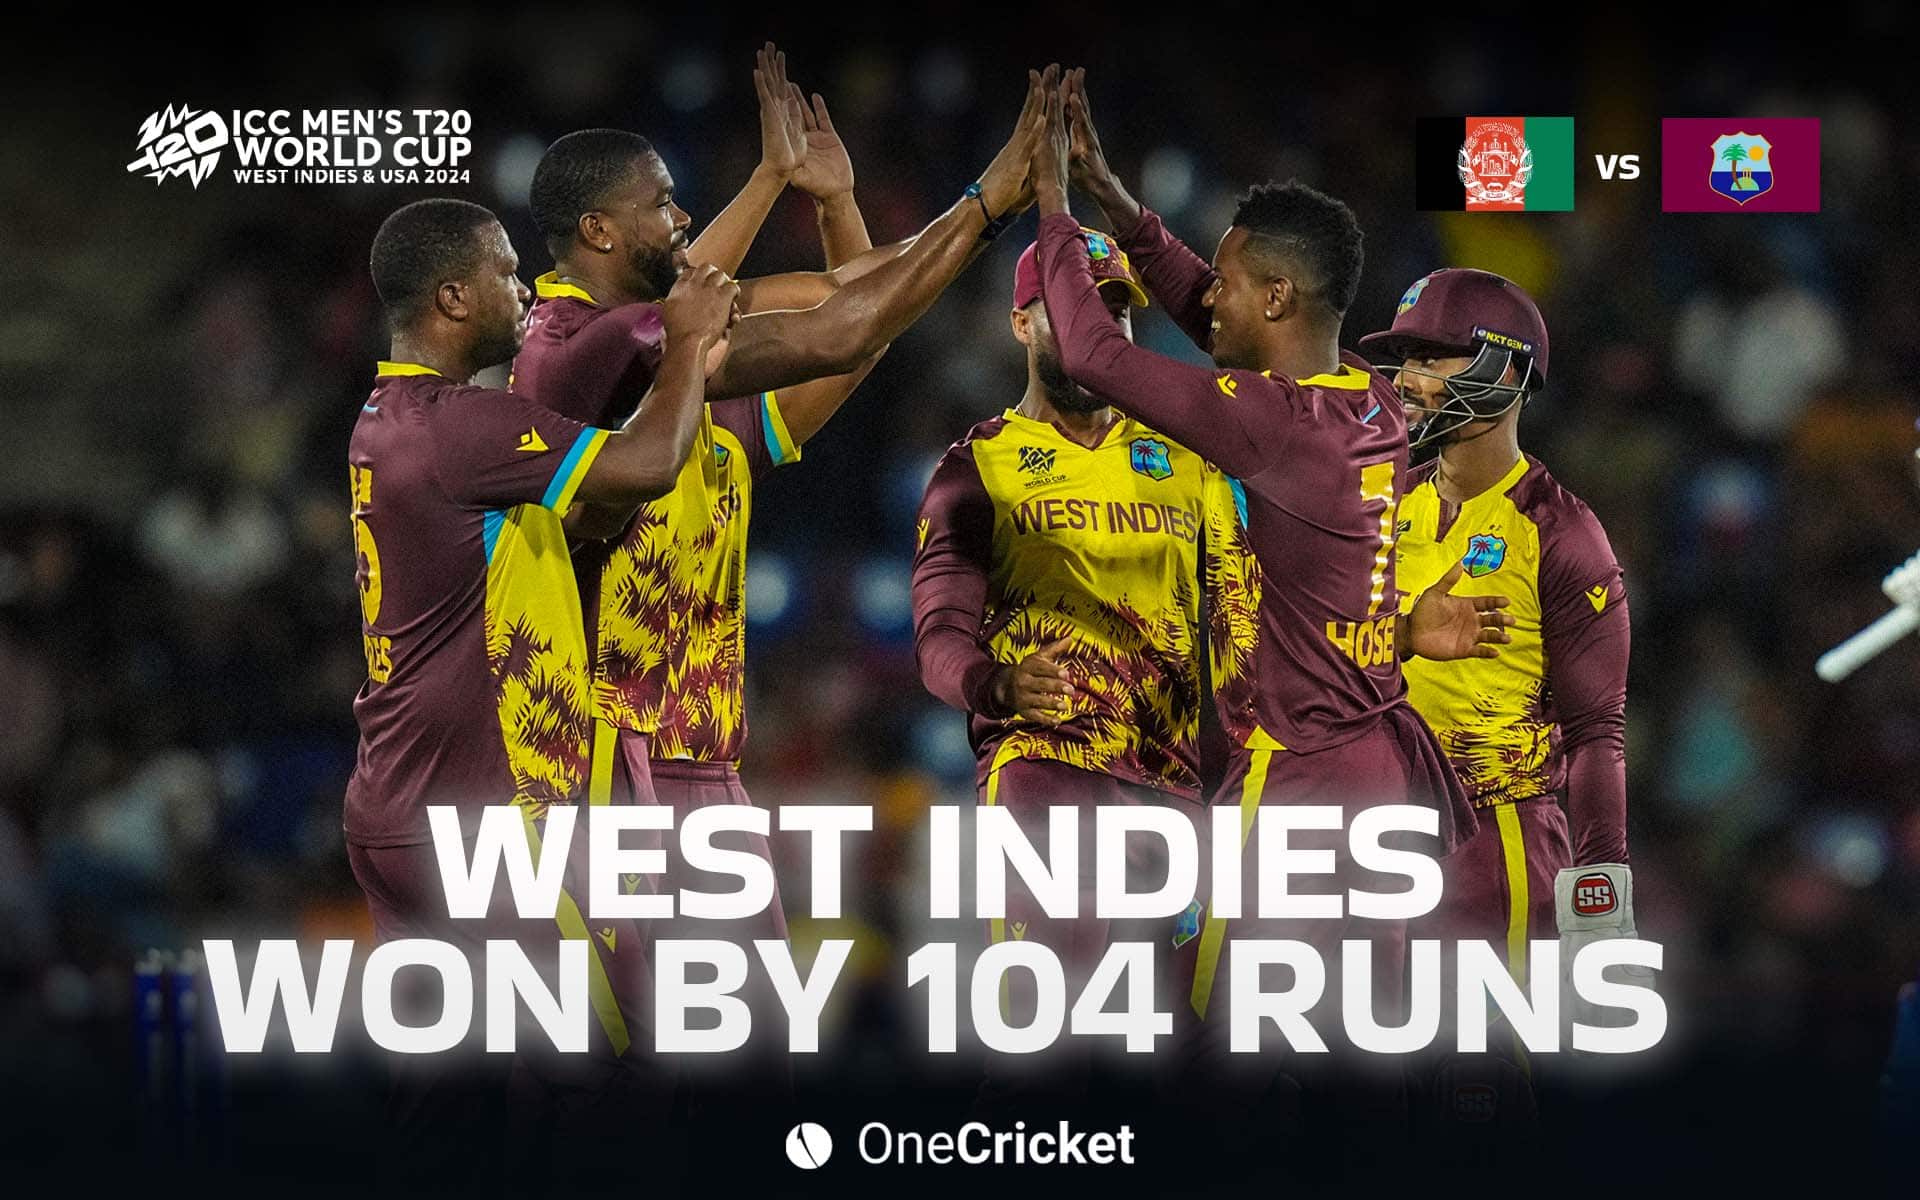 West Indies won the game by 104 runs vs AFG [OneCricket]